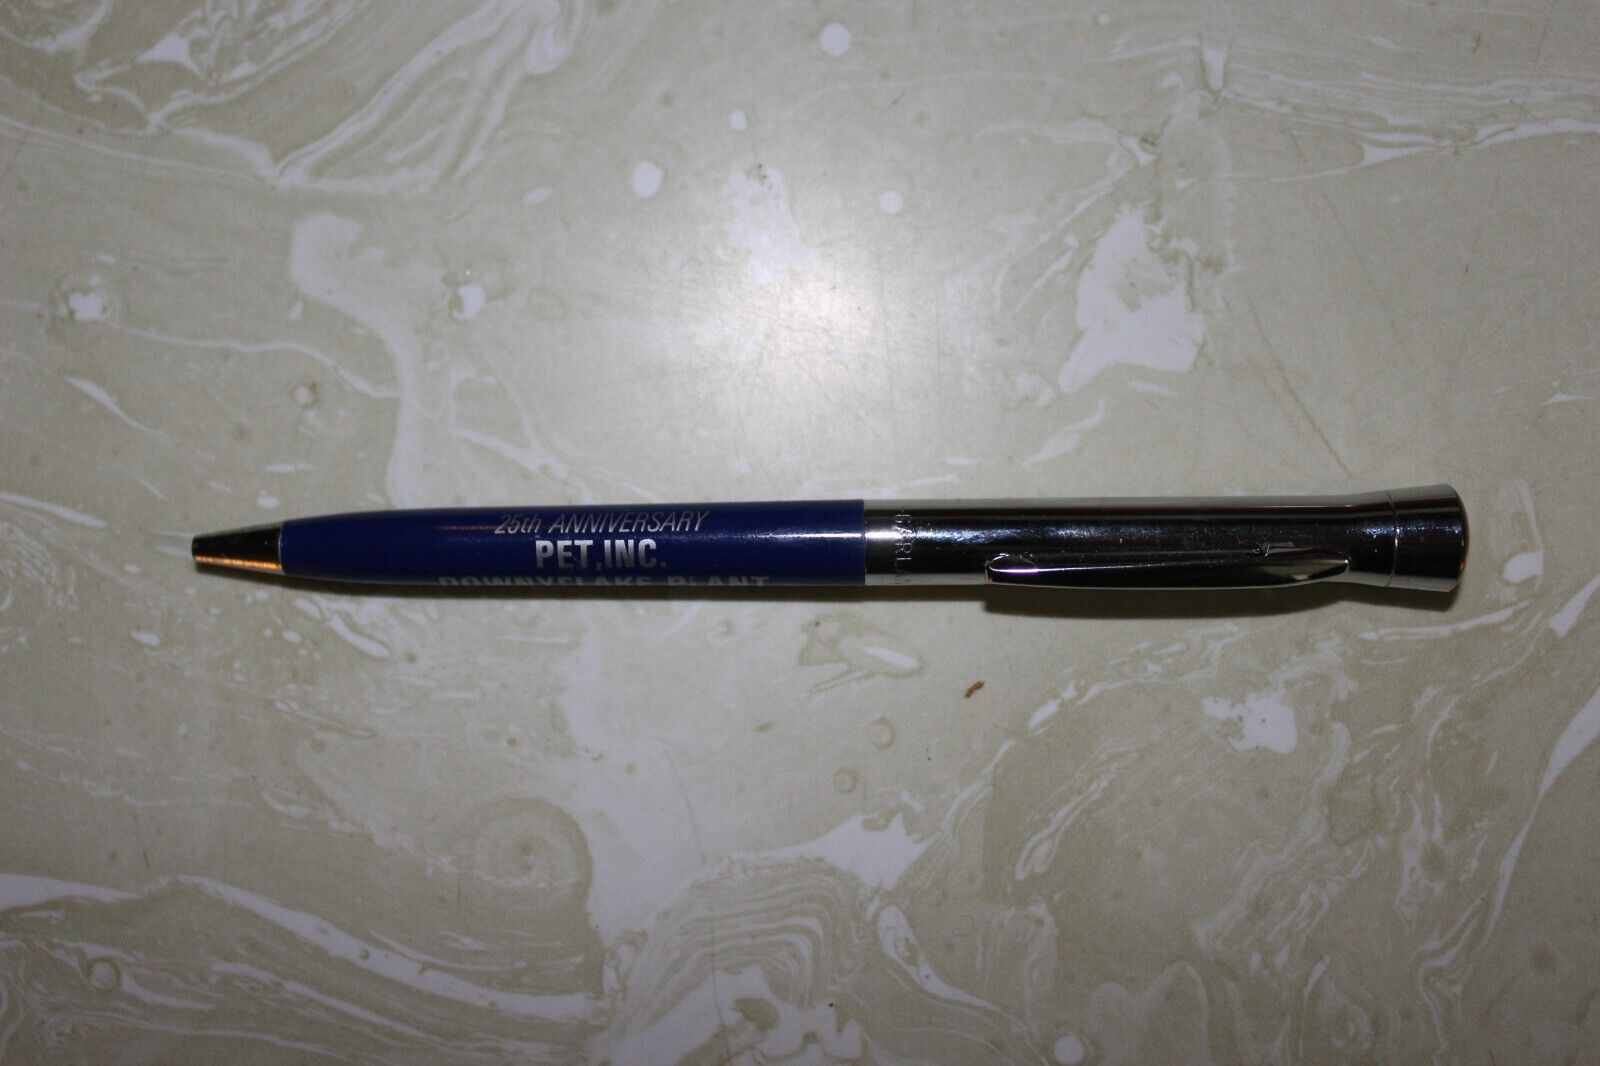 VINTAGE PEN FROM 25TH ANNIVERSARY PET INC. DOWNYFLAKE PLANT 1963-1988